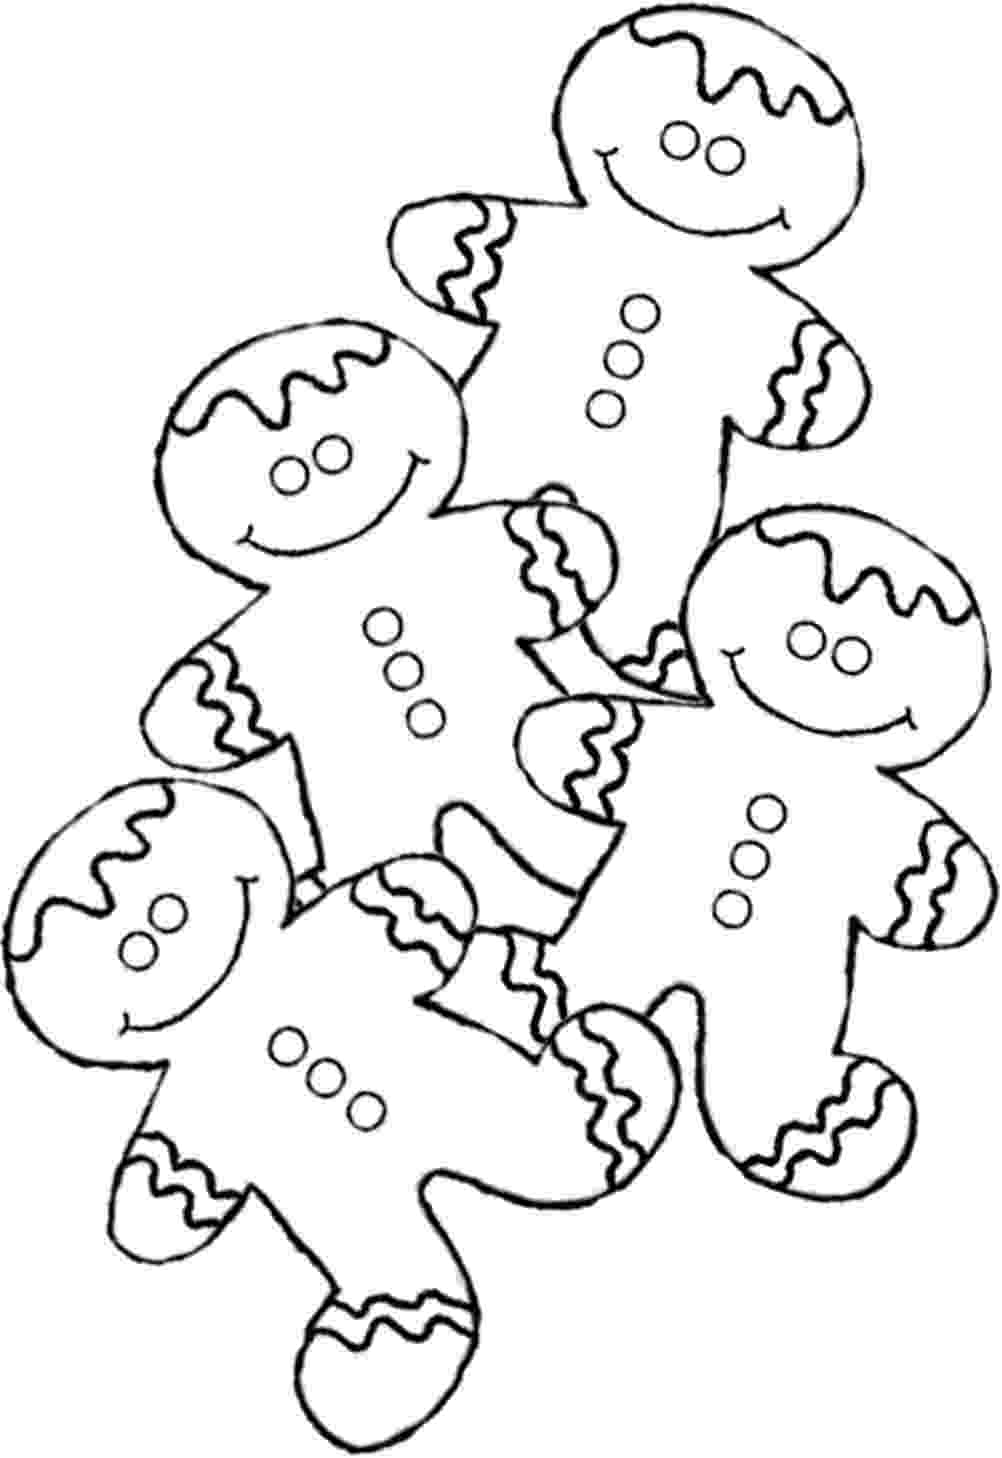 gingerbread man color sheet printable gingerbread house coloring pages for kids man gingerbread sheet color 